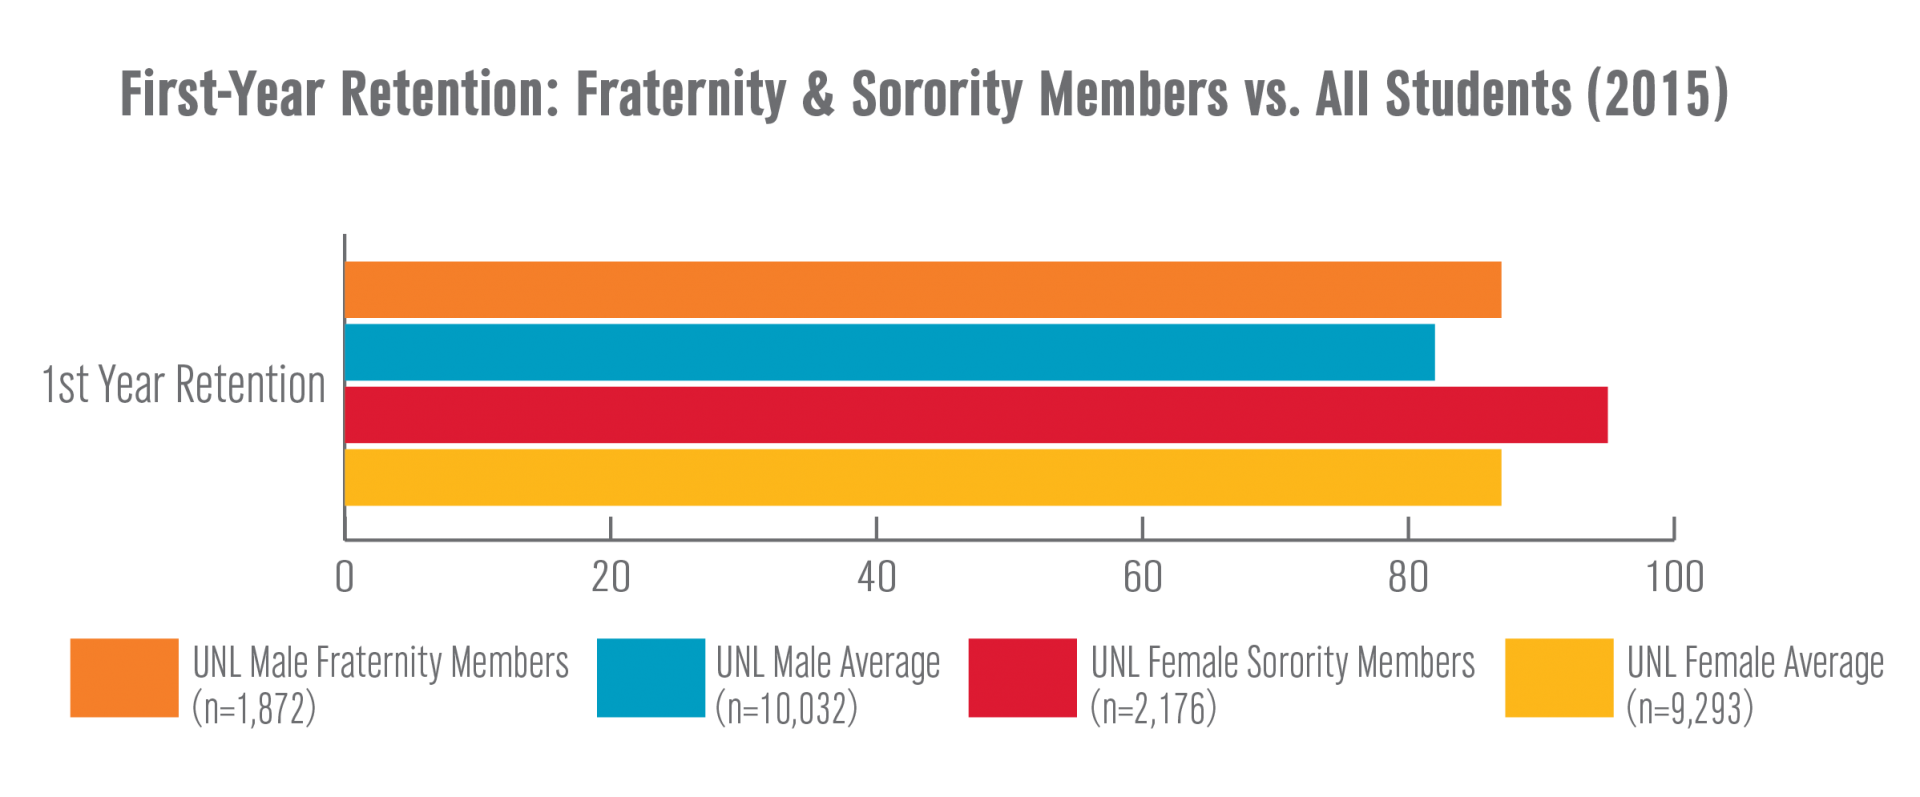 Chart: First-Year Retention: Fraternity & Sorority Members vs. All Students (2015)